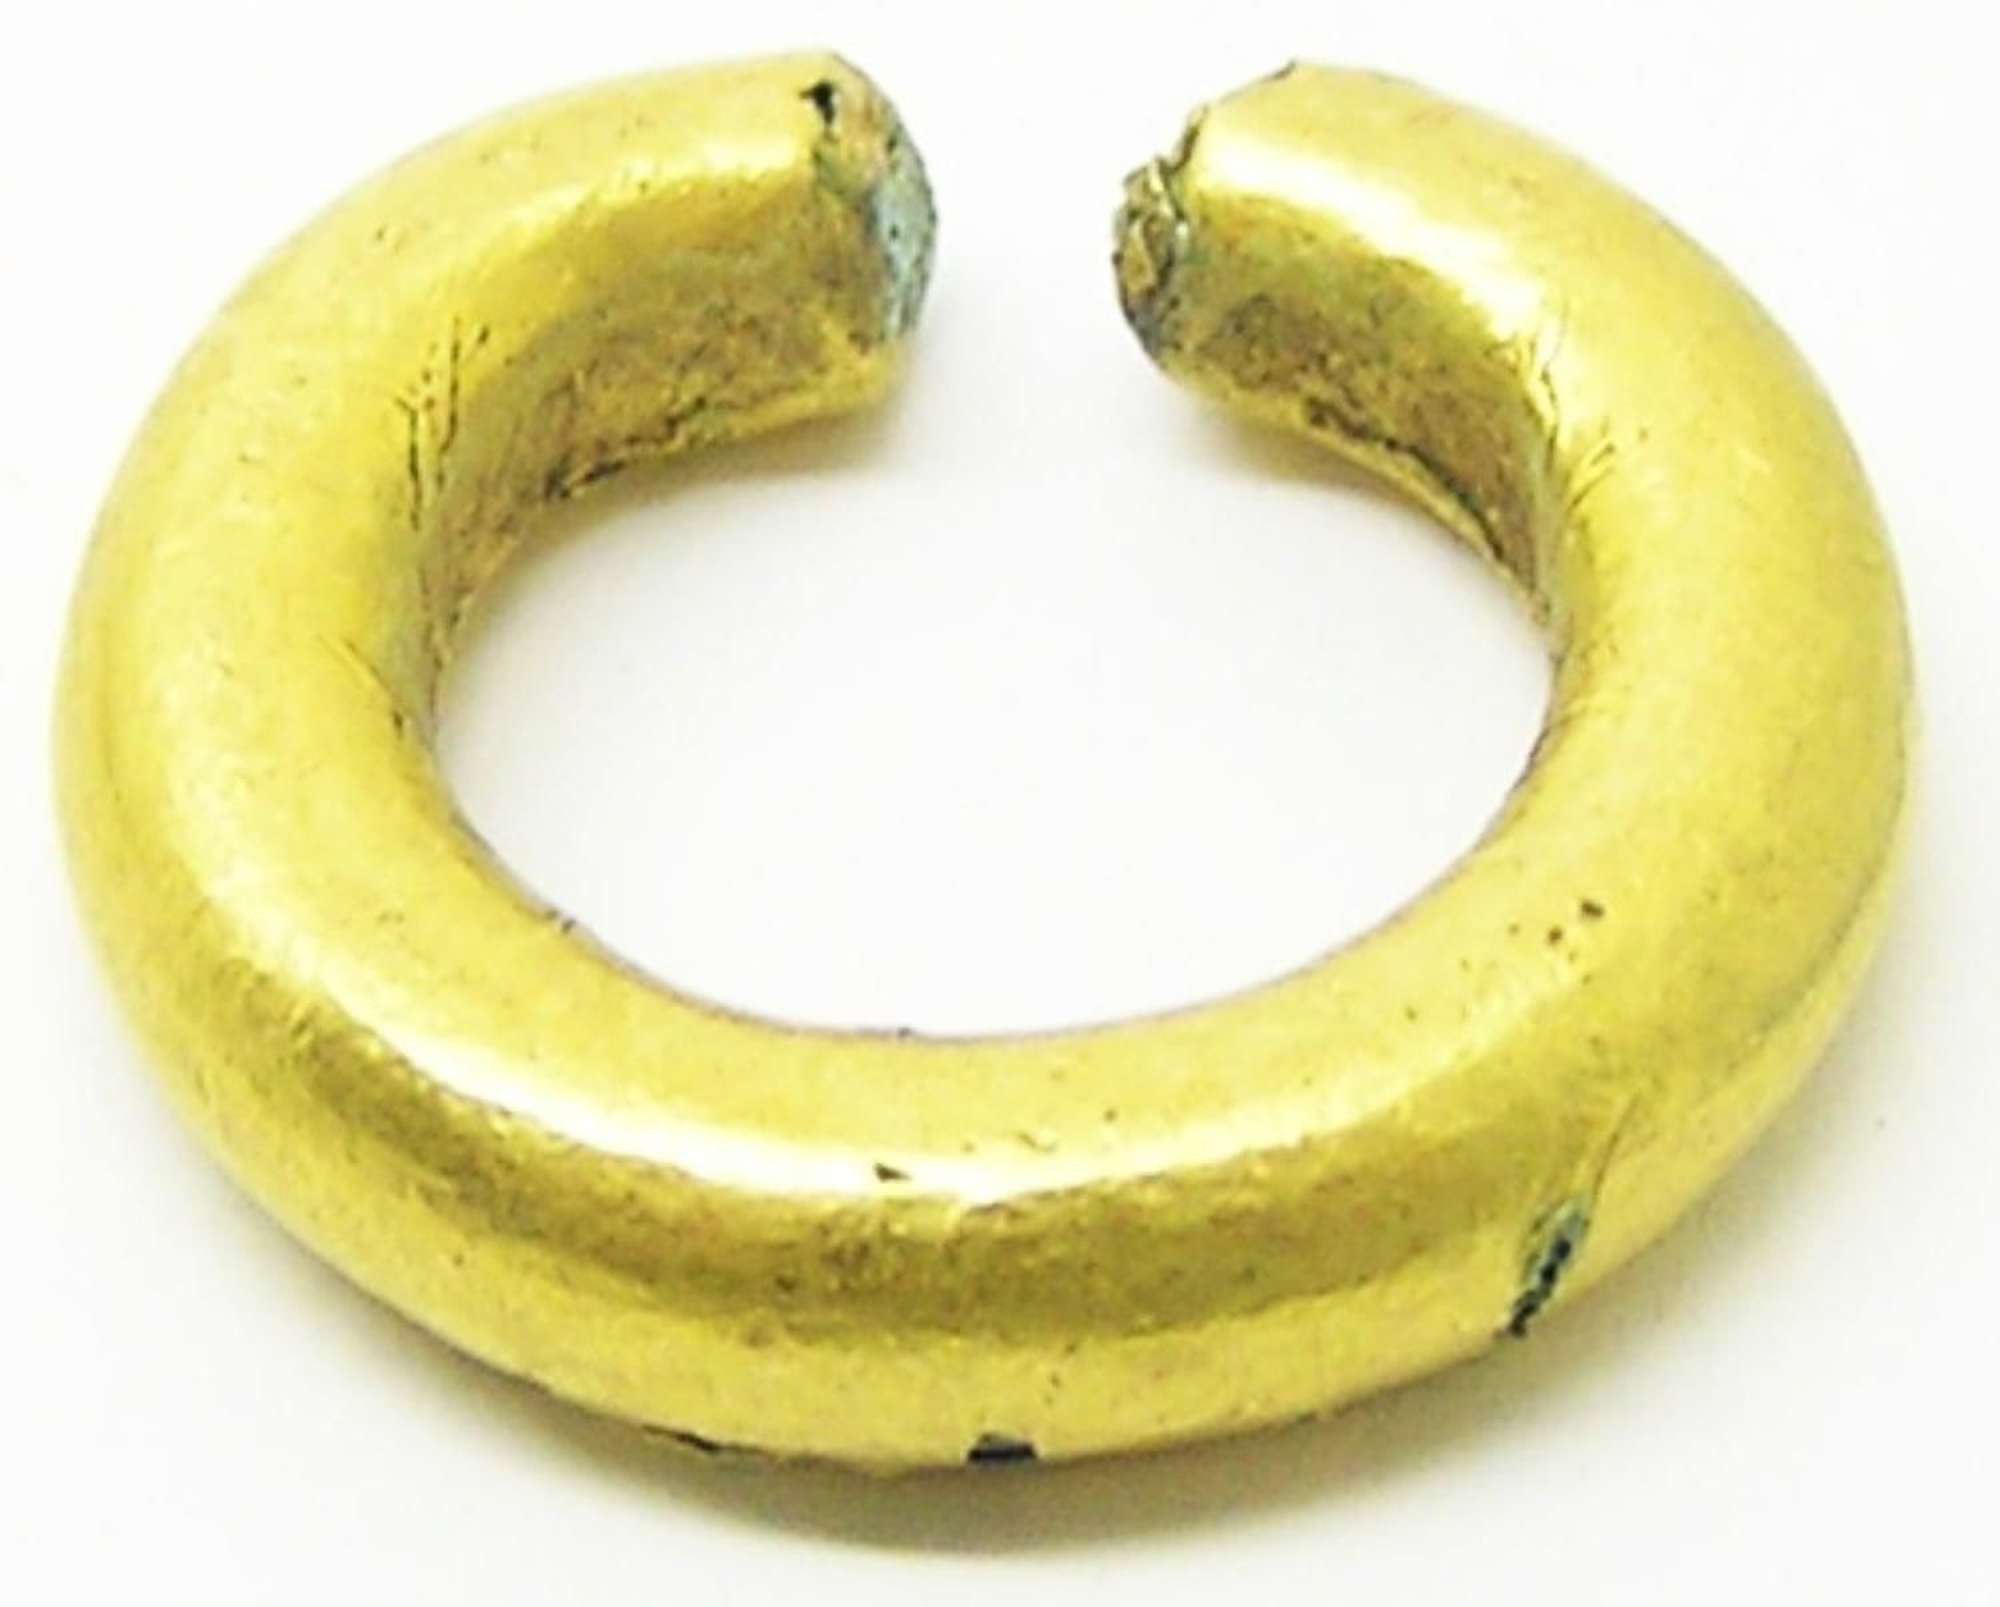 Bronze Age Decorated Gold Ring Money Adornment